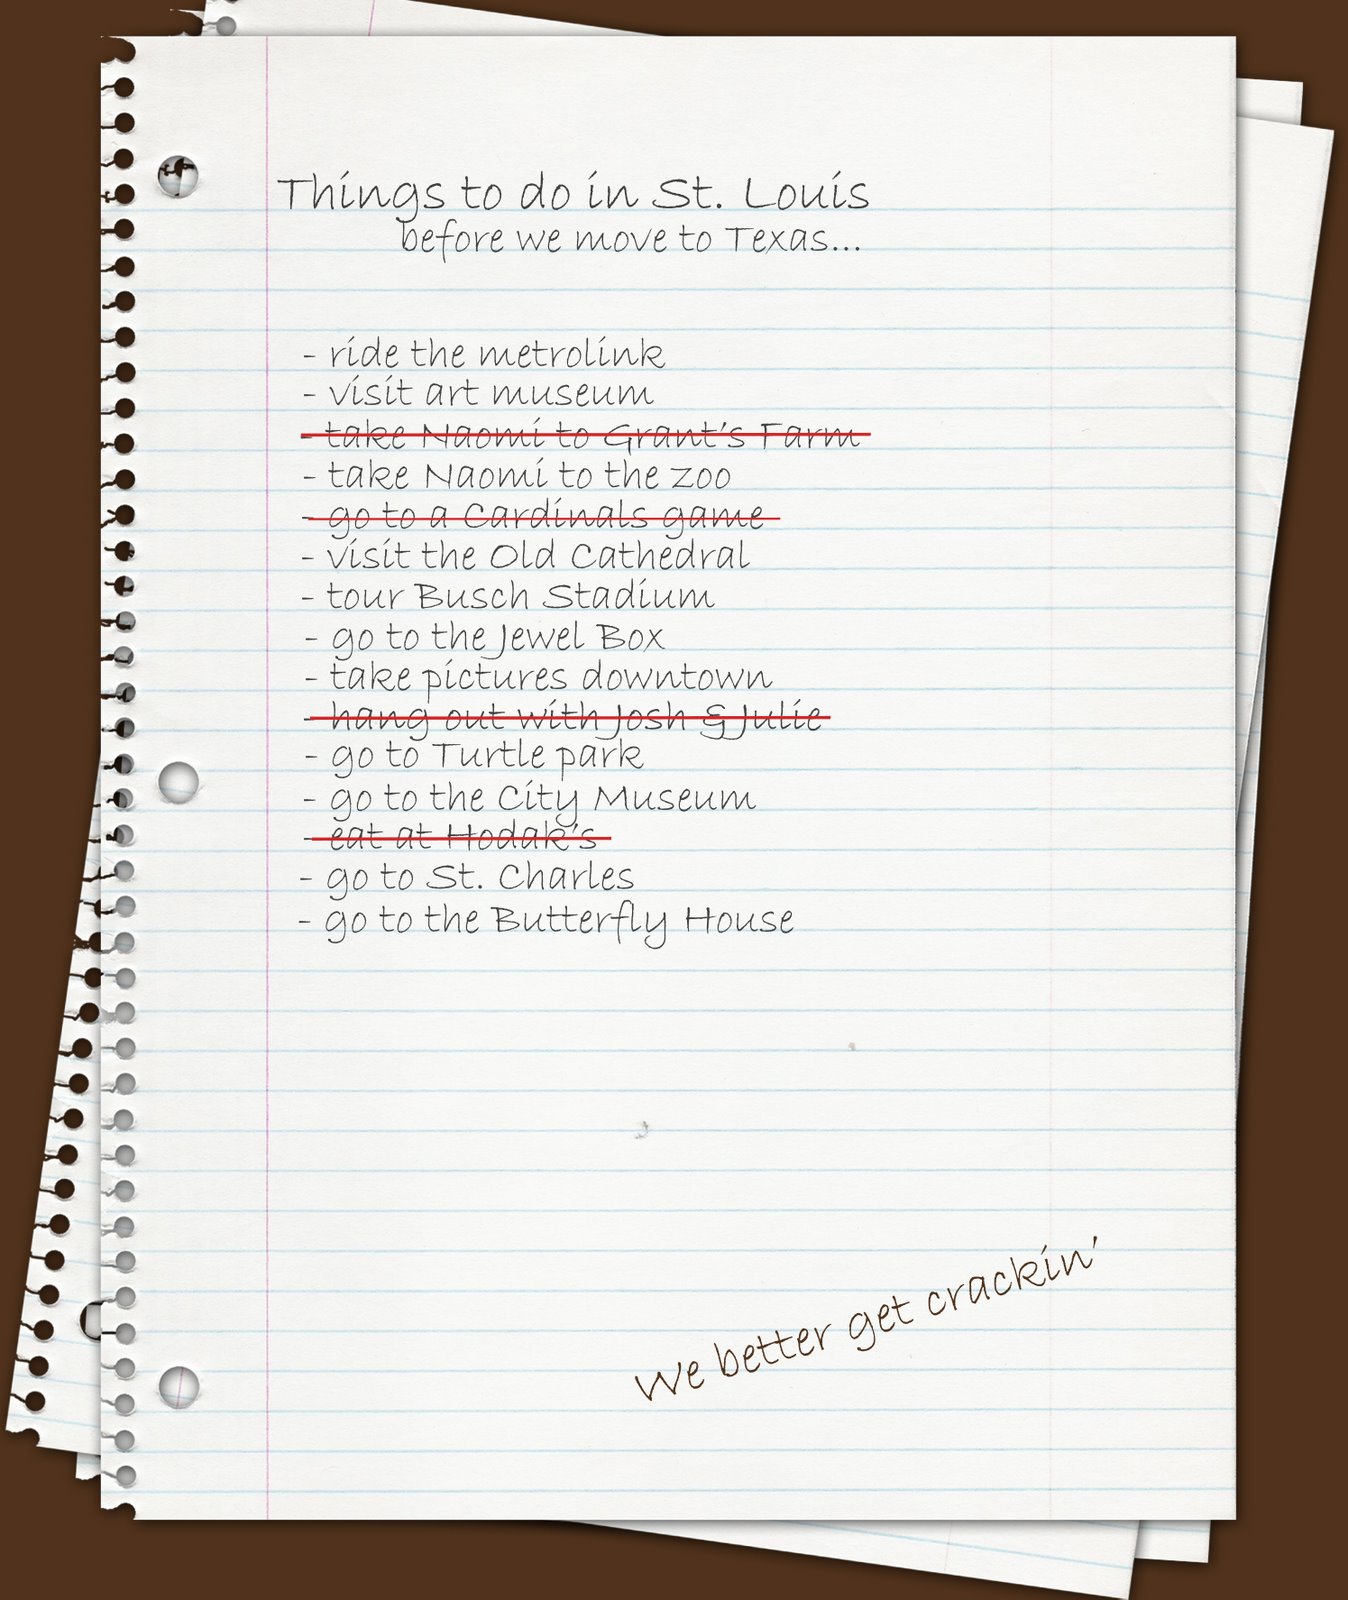 [things+to+do+in+st+louis+copy.jpg]